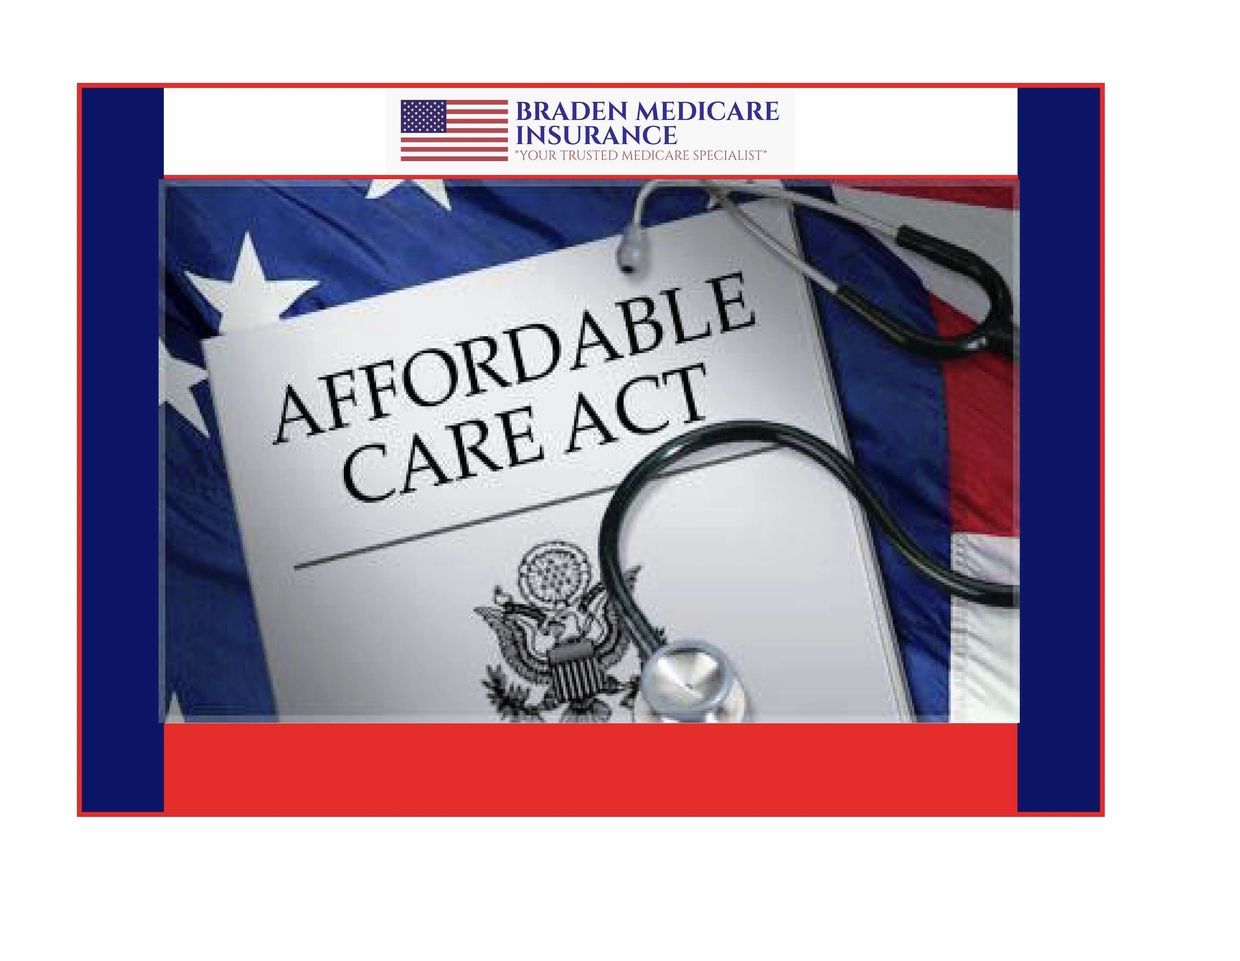 For many Americans Under 65, the best value in Health Insurance is ACA (Affordable Care Act) plans.